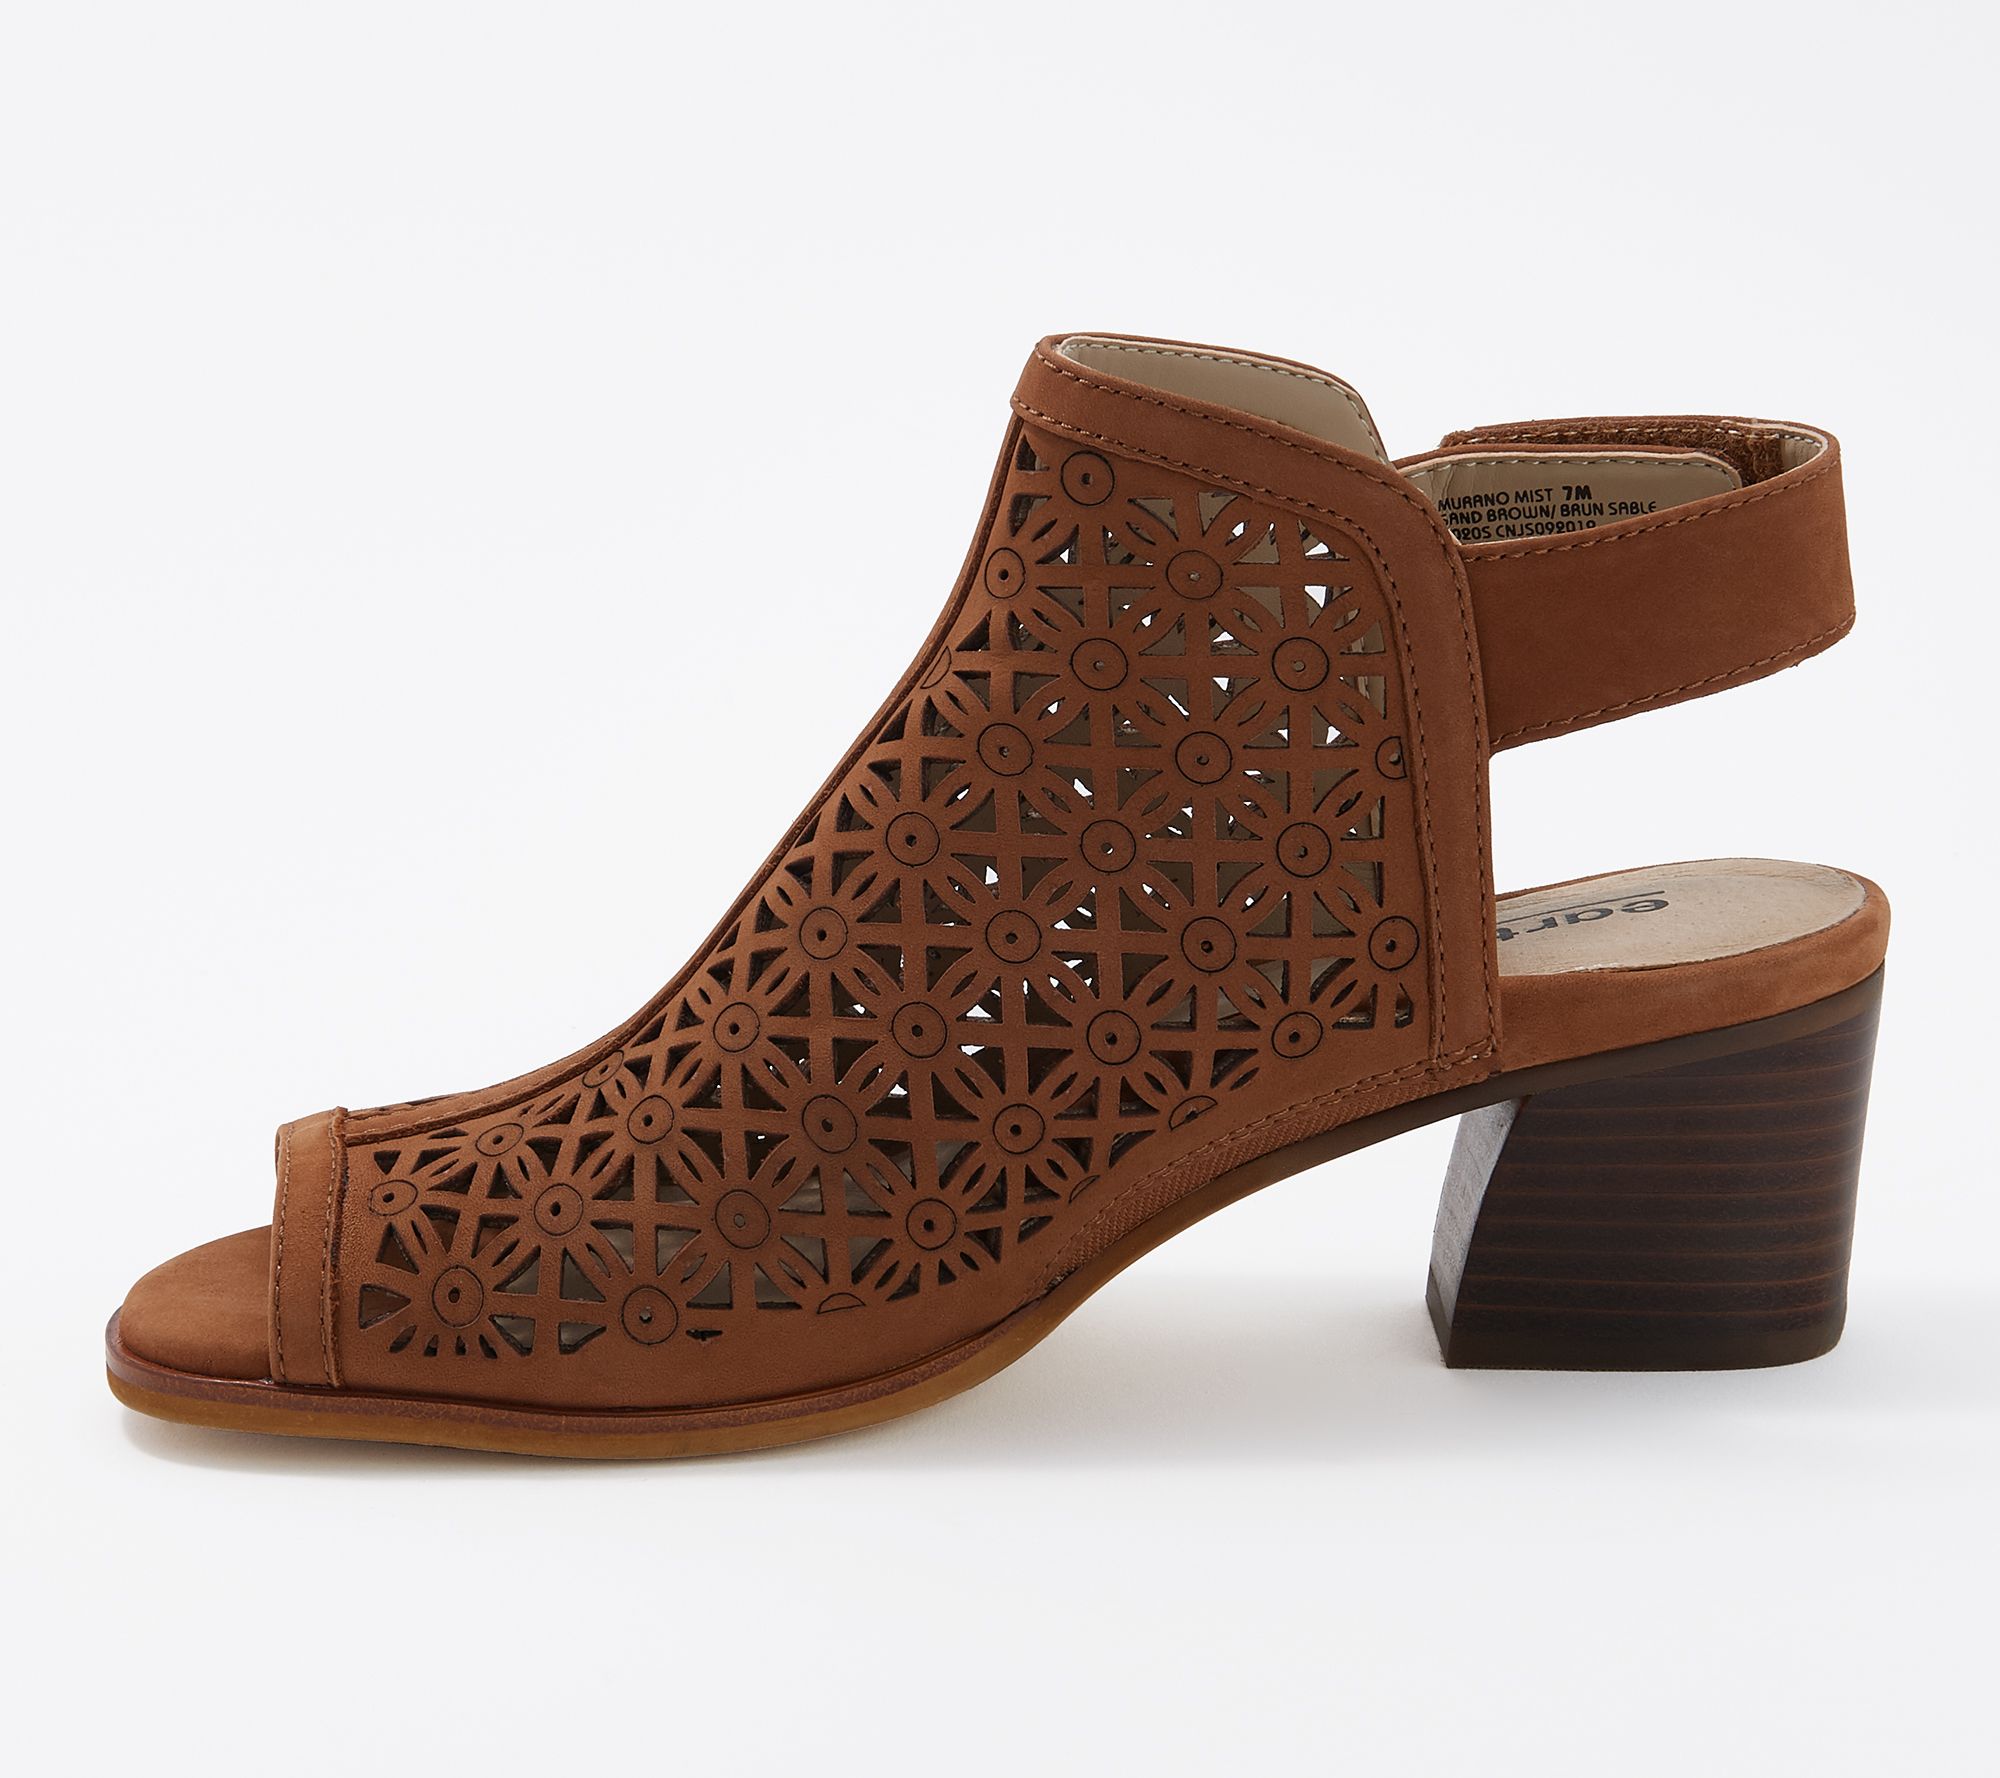 Earth Perforated Leather Heeled Sandal - Murano Mist - QVC.com